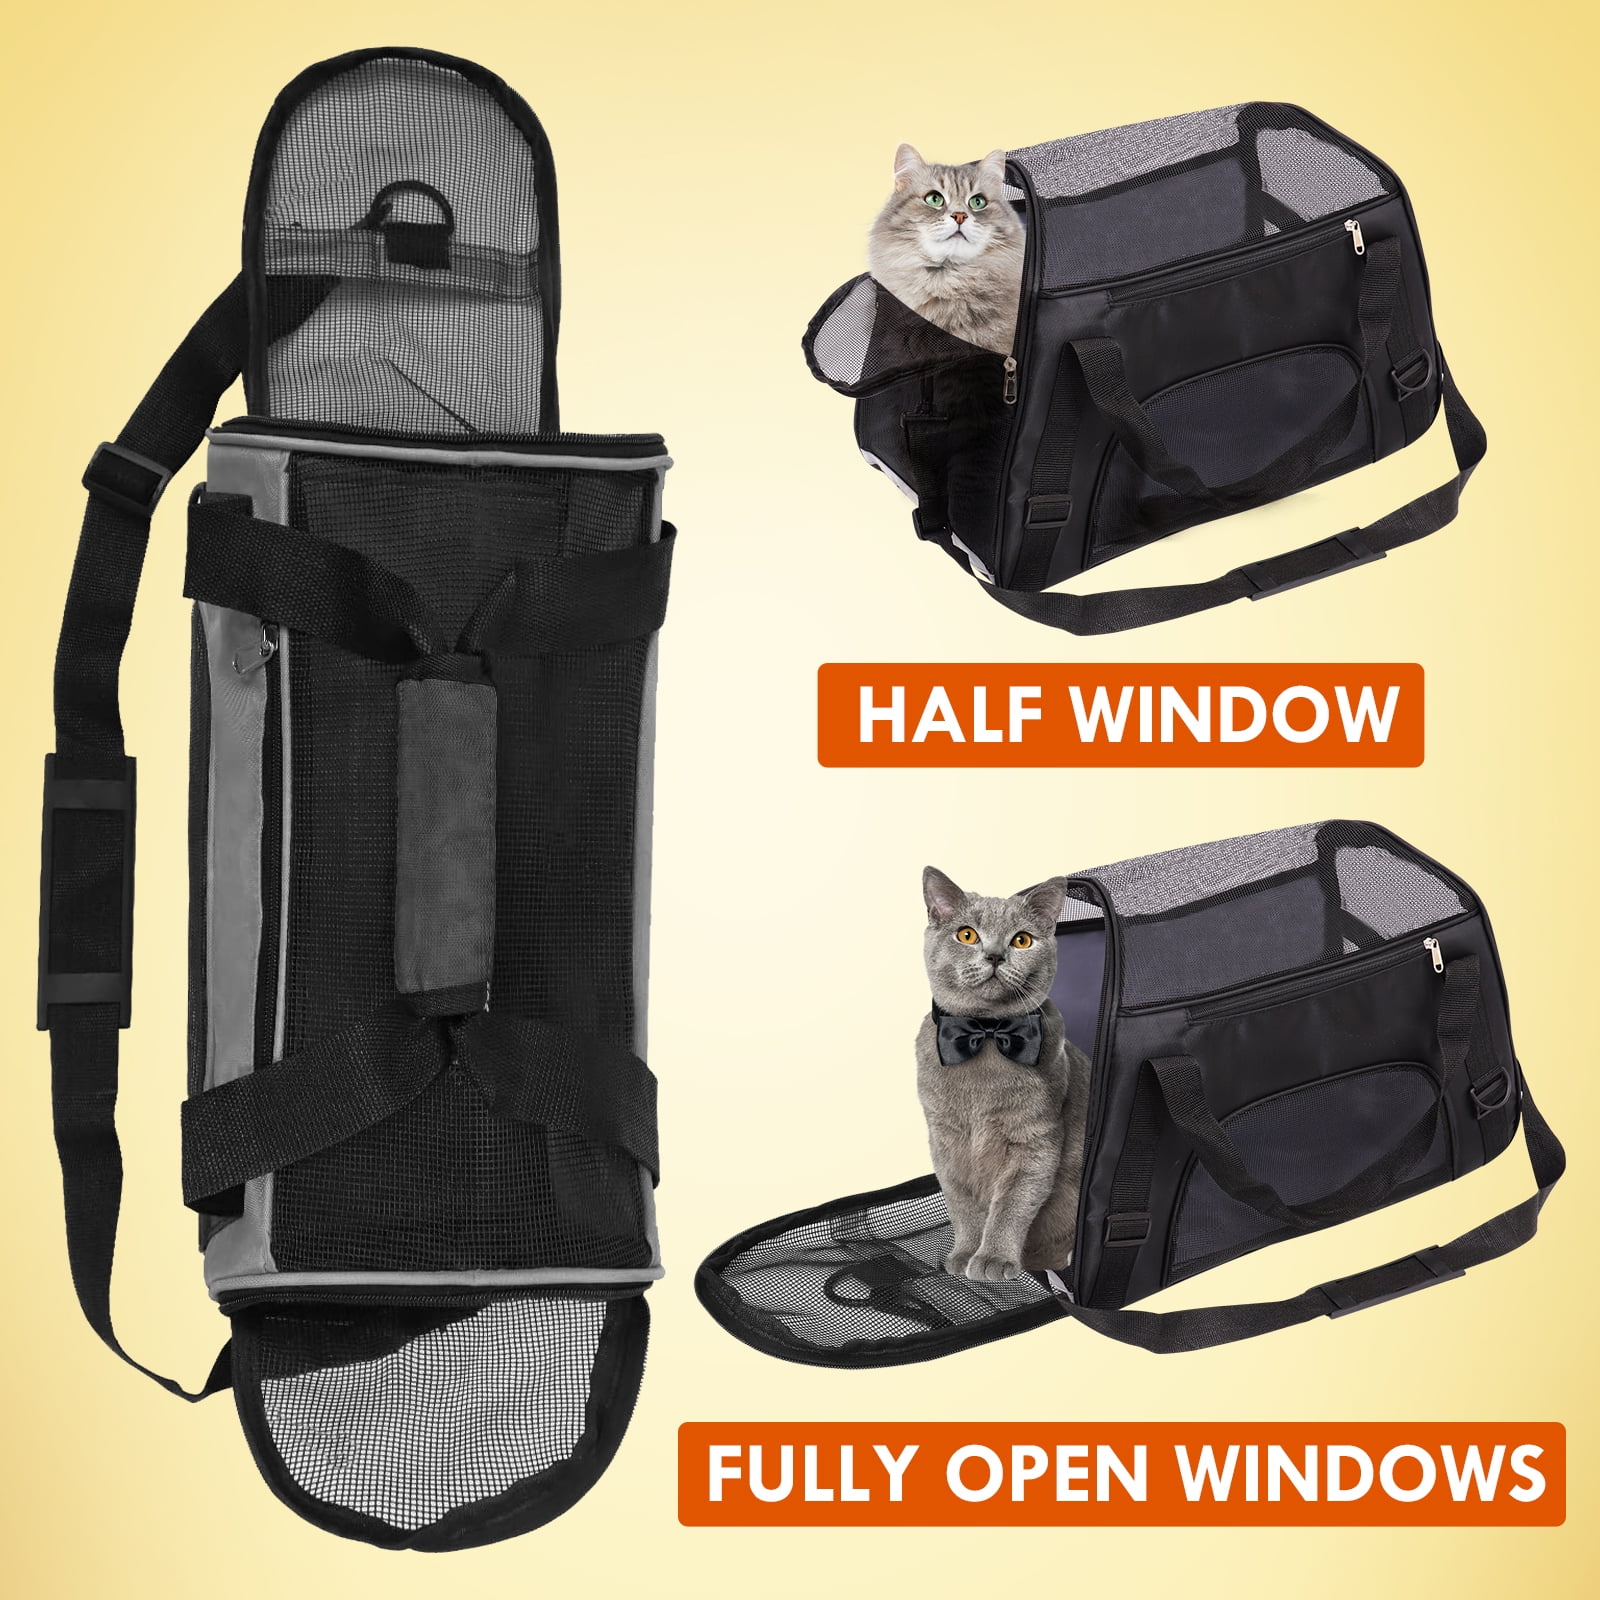 EXPAWLORER cat carriers for Large cats 20 lbs - Soft-Sided